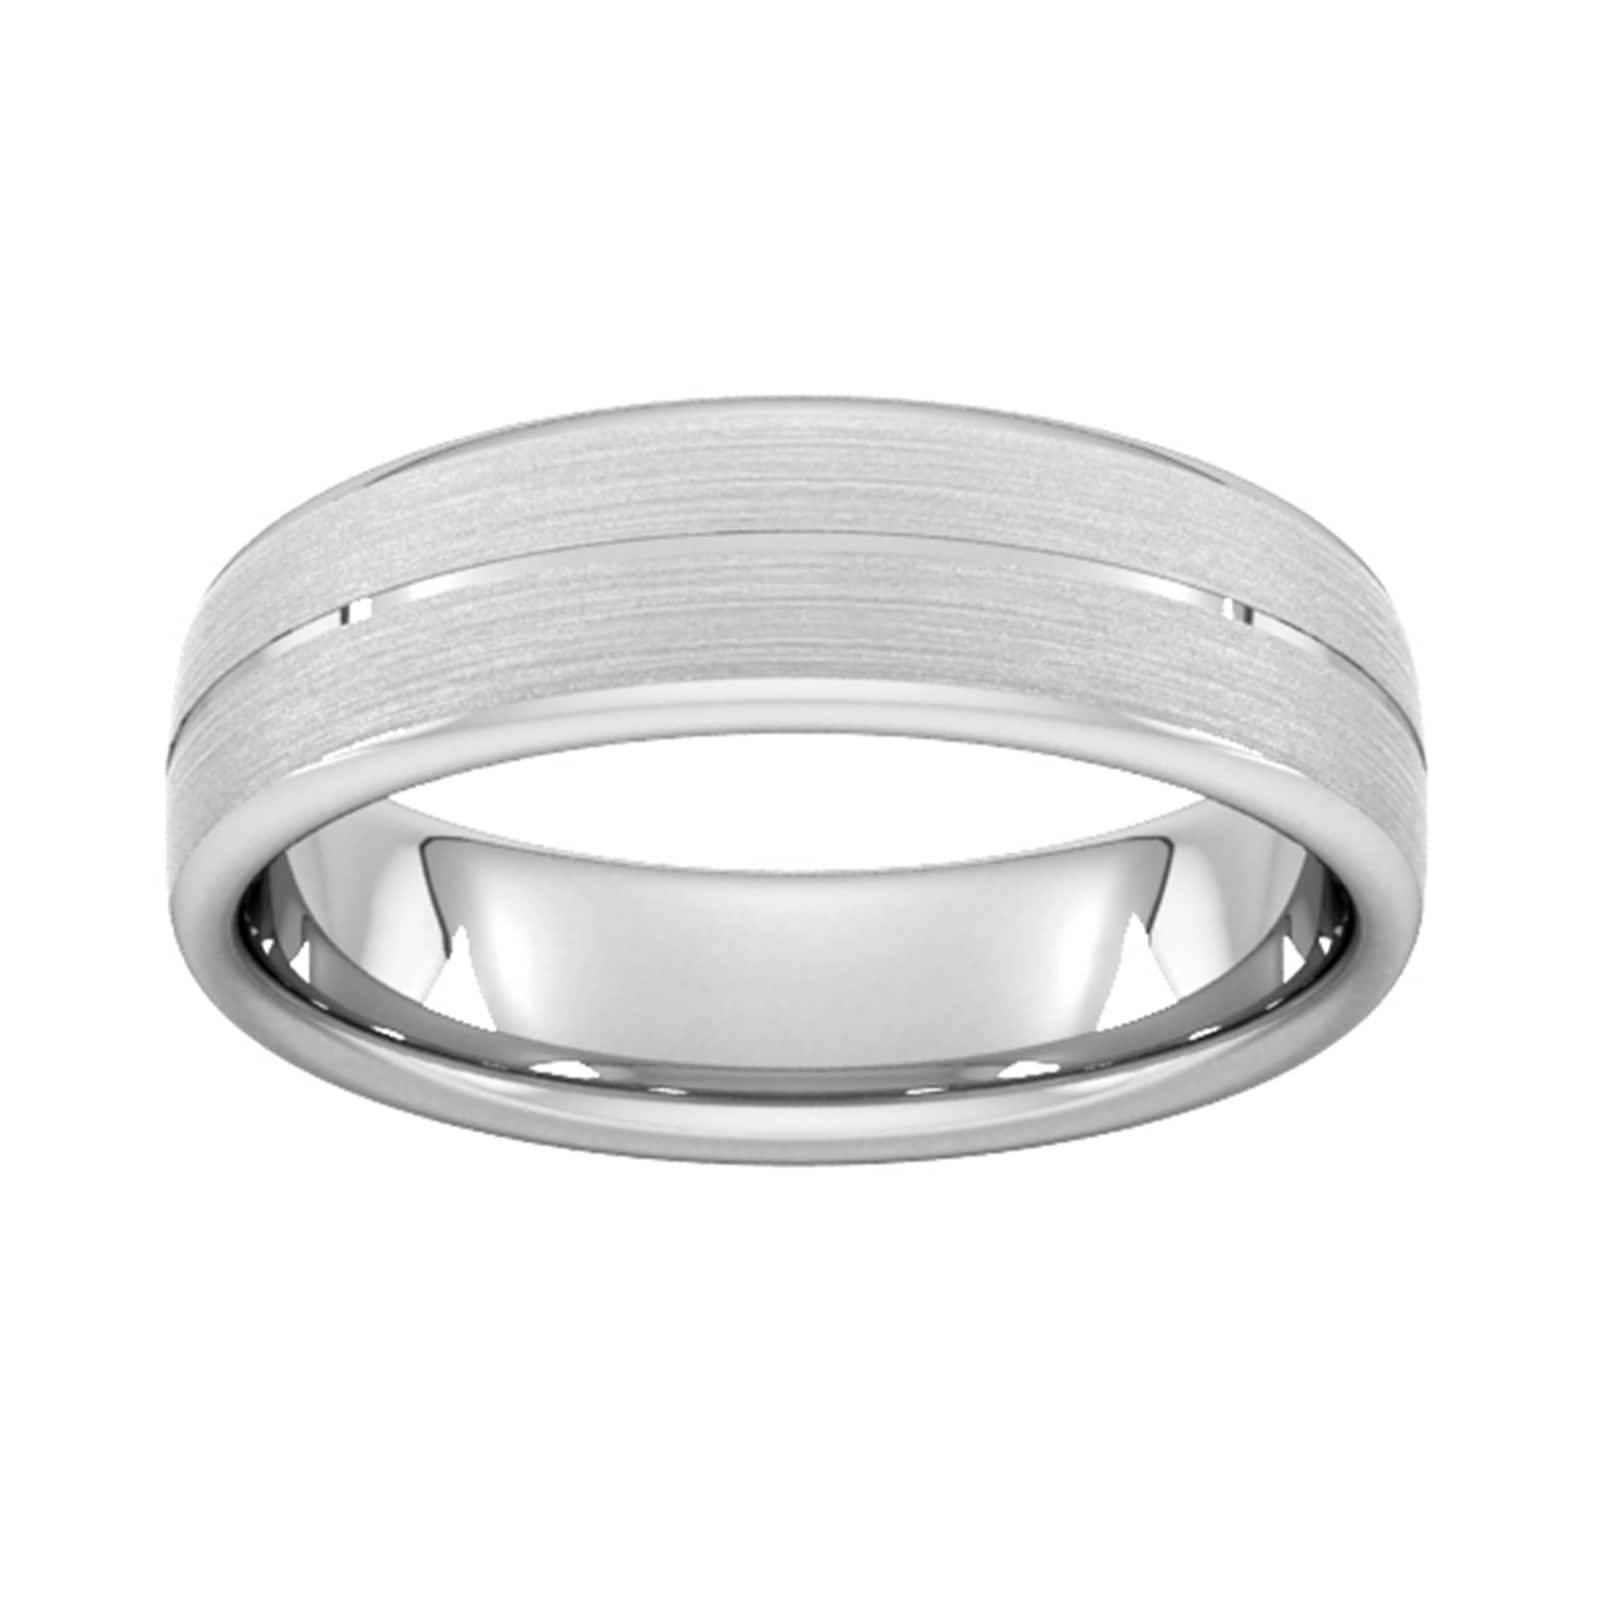 6mm D Shape Heavy Centre Groove With Chamfered Edge Wedding Ring In 18 Carat White Gold - Ring Size O